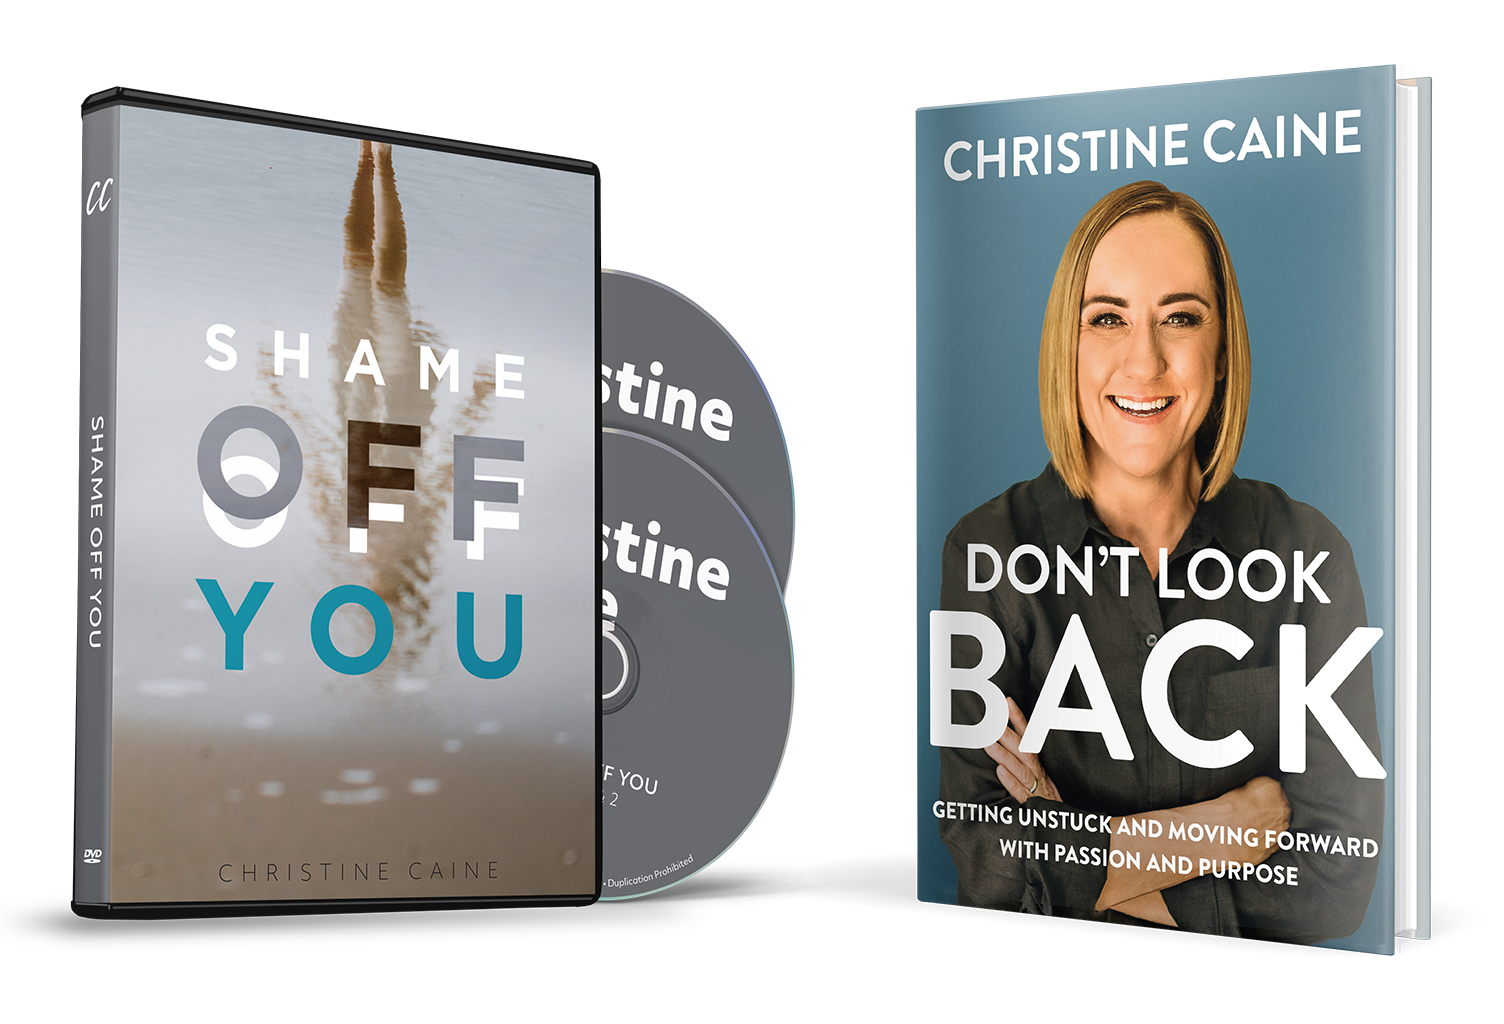 Shame Off You & Don't Look Back by Christine Caine by TBN